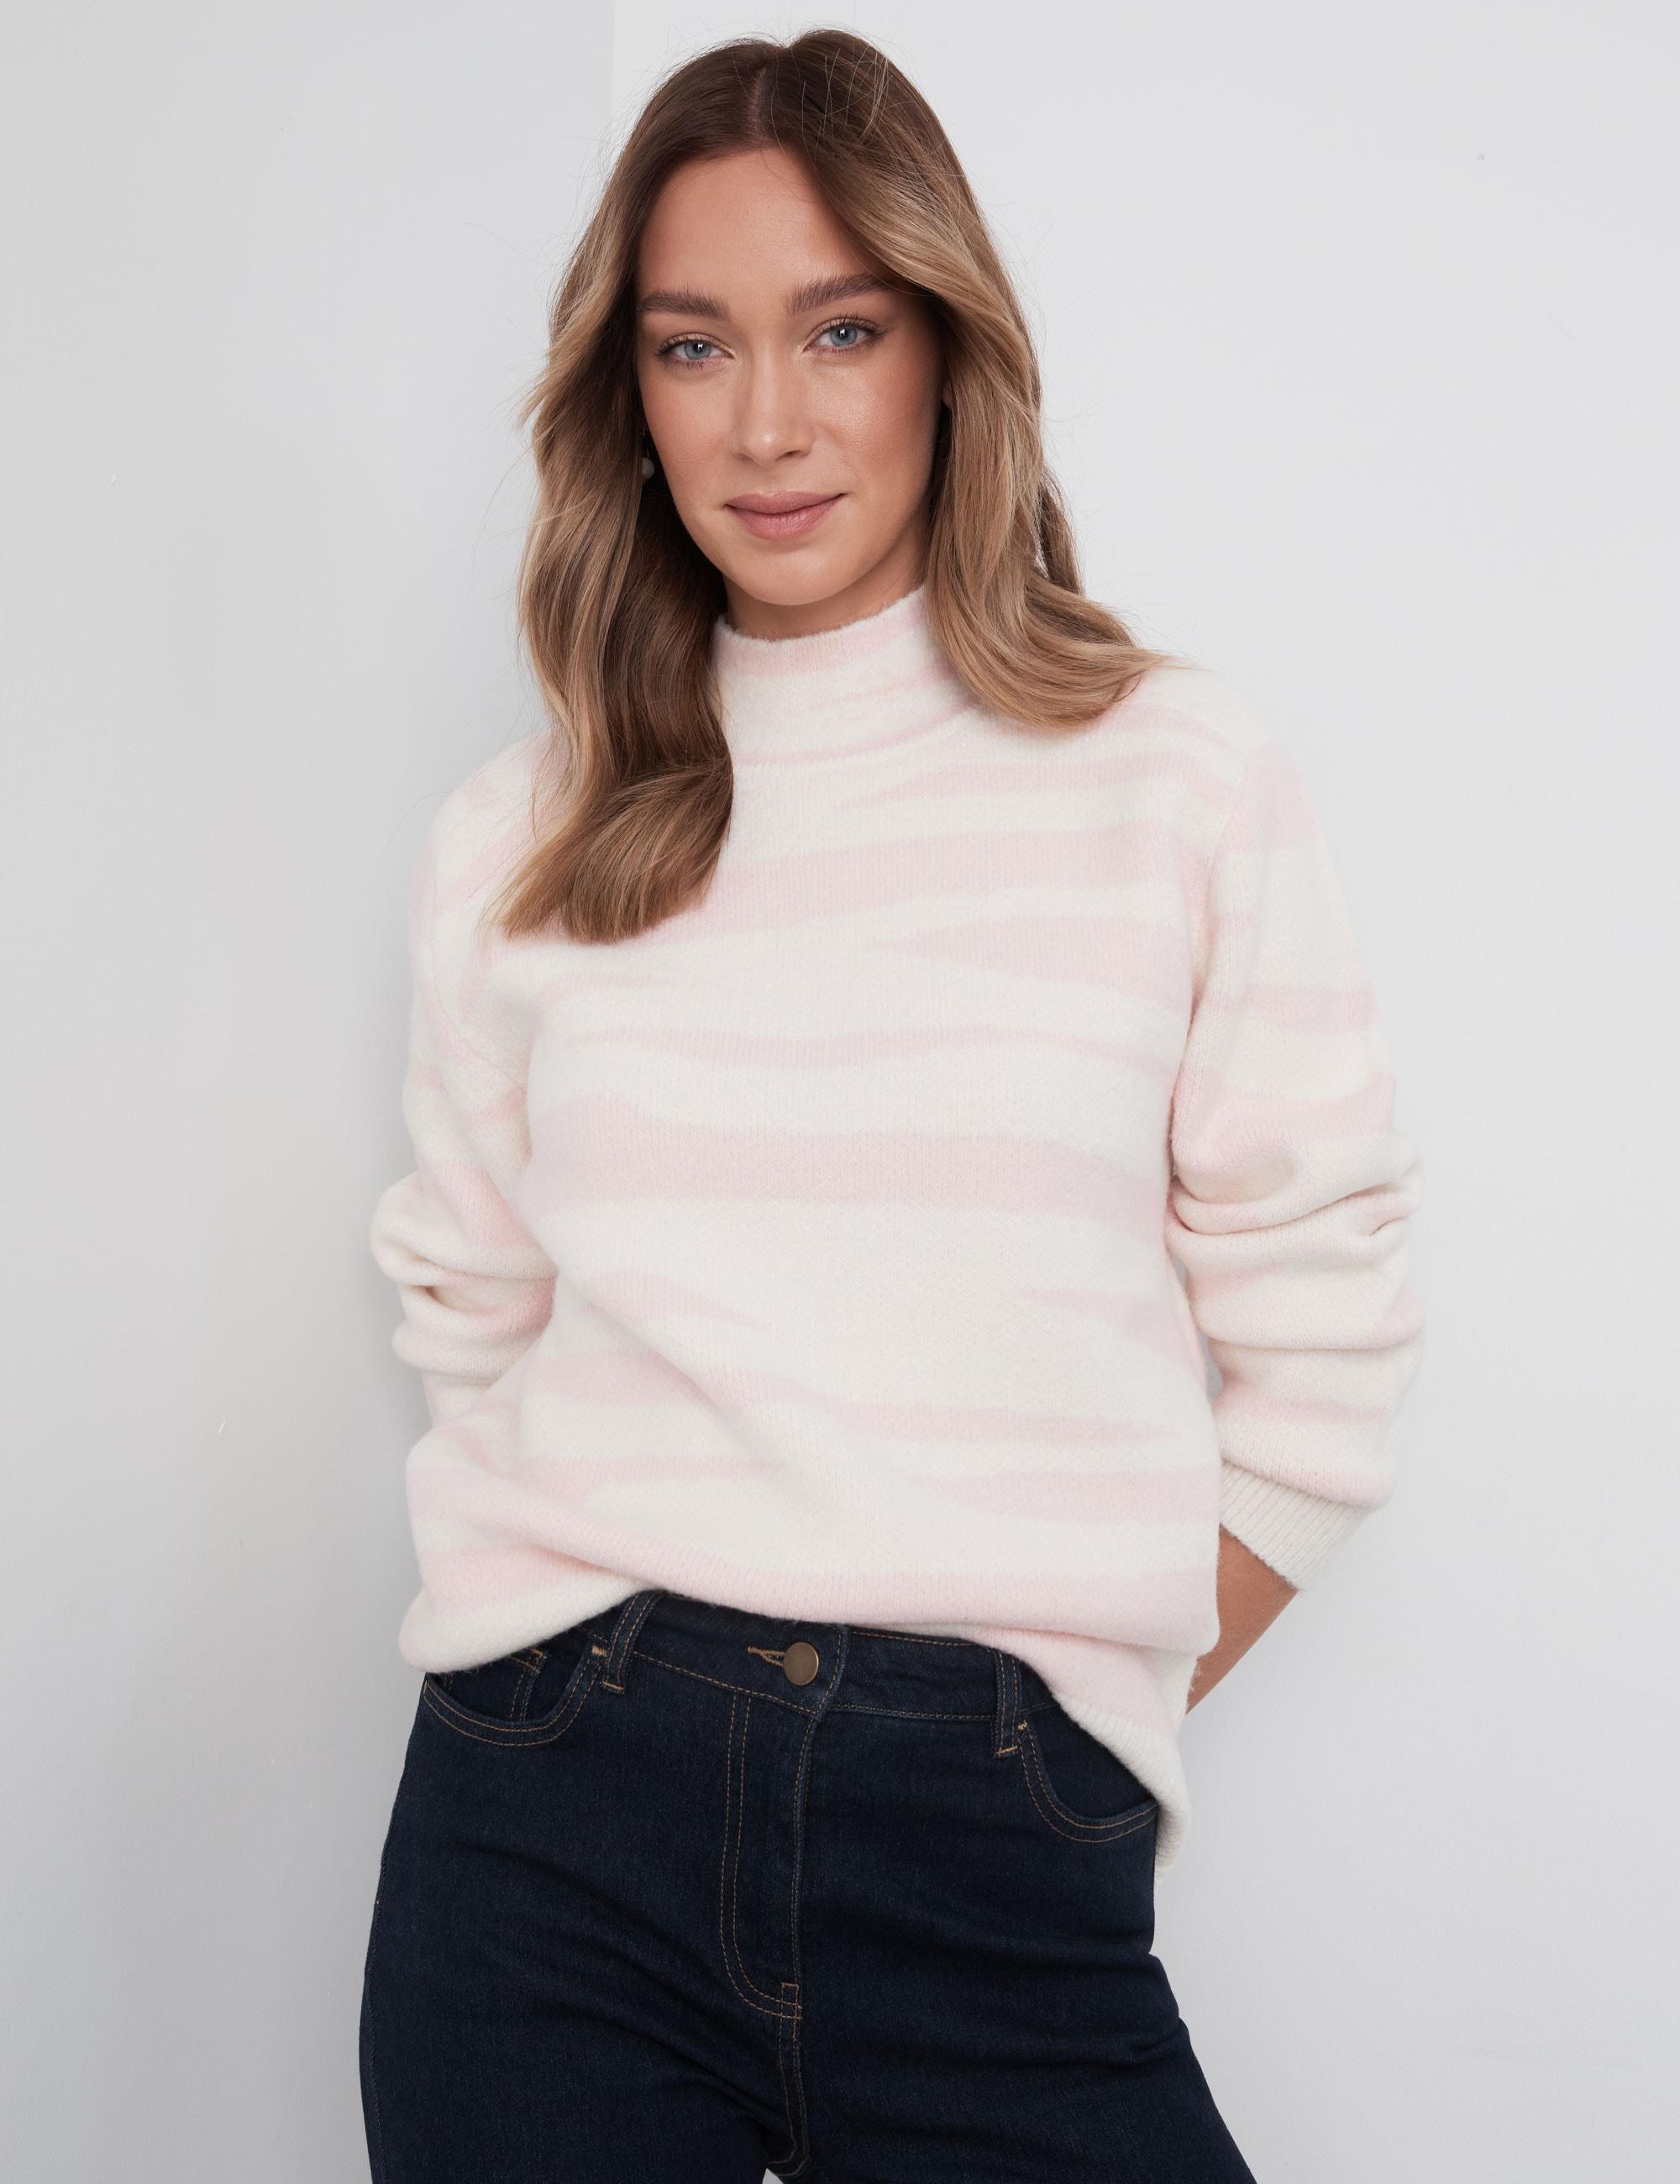 NONI B - Womens Jumper - Regular Winter Sweater - Pink Pullover Zebra Jacquard - Long Sleeve - Chalk Pink Abstract - High Neck - Casual Work Clothing